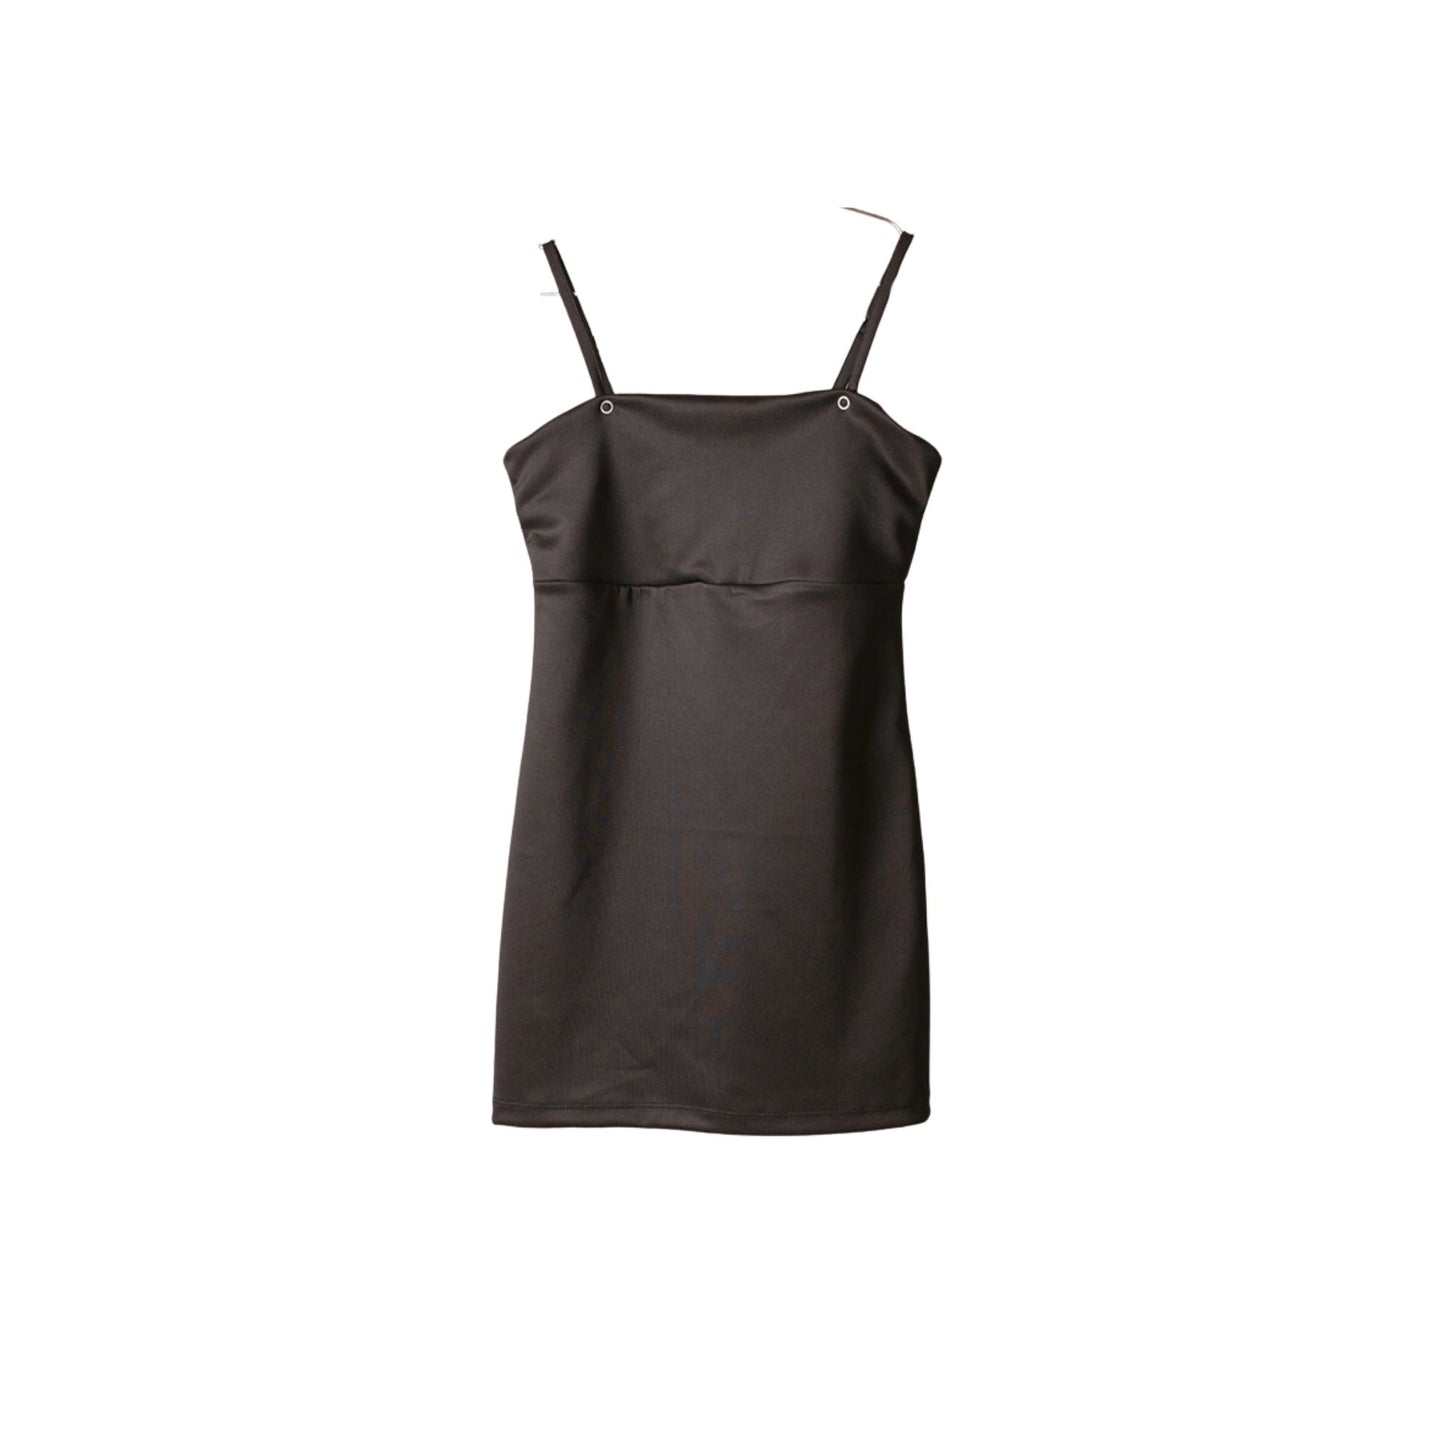 Sexy Mommy PH Breastfeeding Wear BLACK Dress | Soft, Comfy, With Built-in Bra Pads